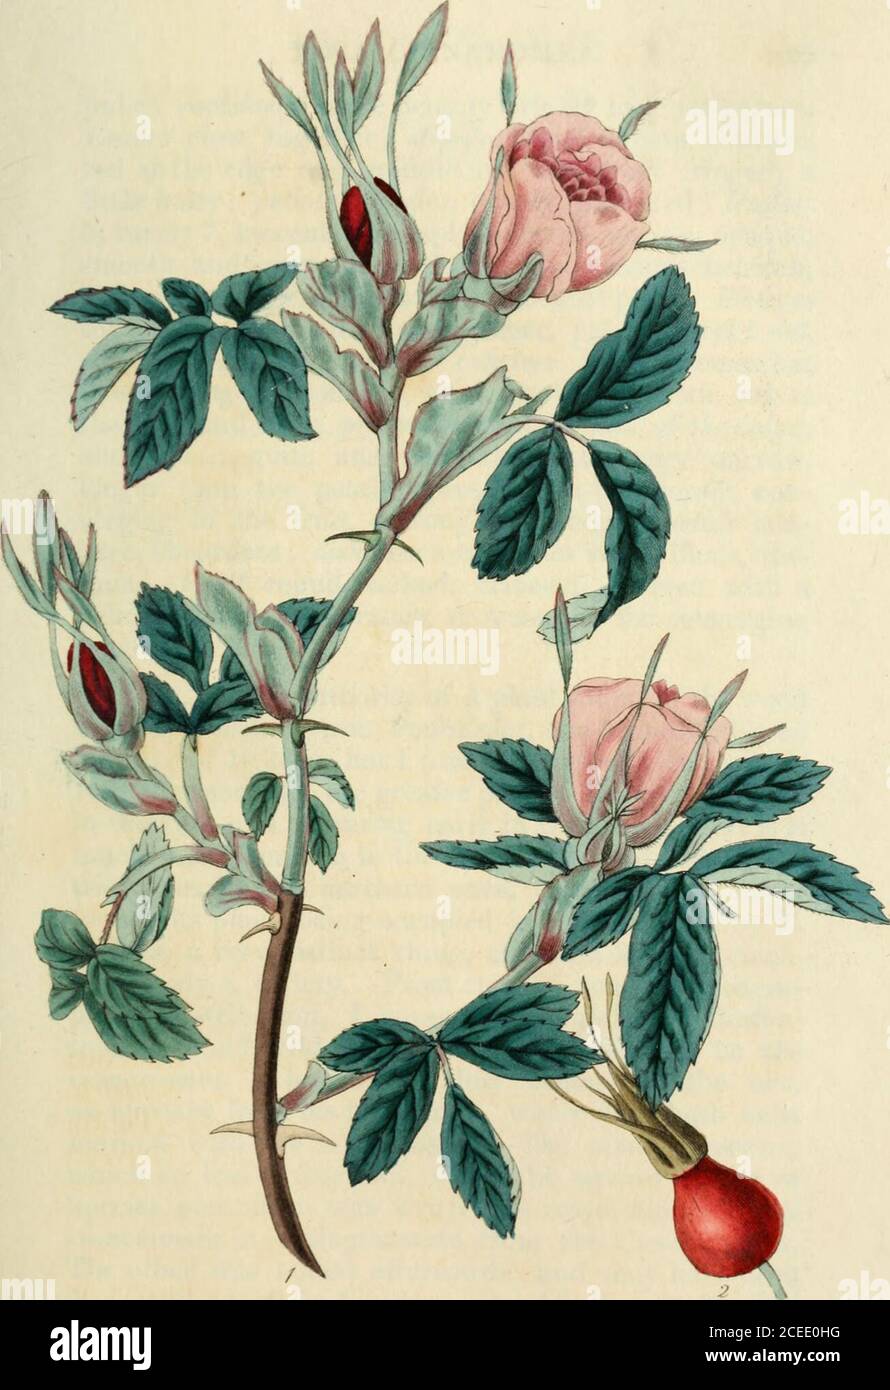 Rosarum monographia, or, A botanical history of roses : to which is added  an appendix, for the use of cultivators, in which the most remarkable  garden varieties are systematically arranged, with